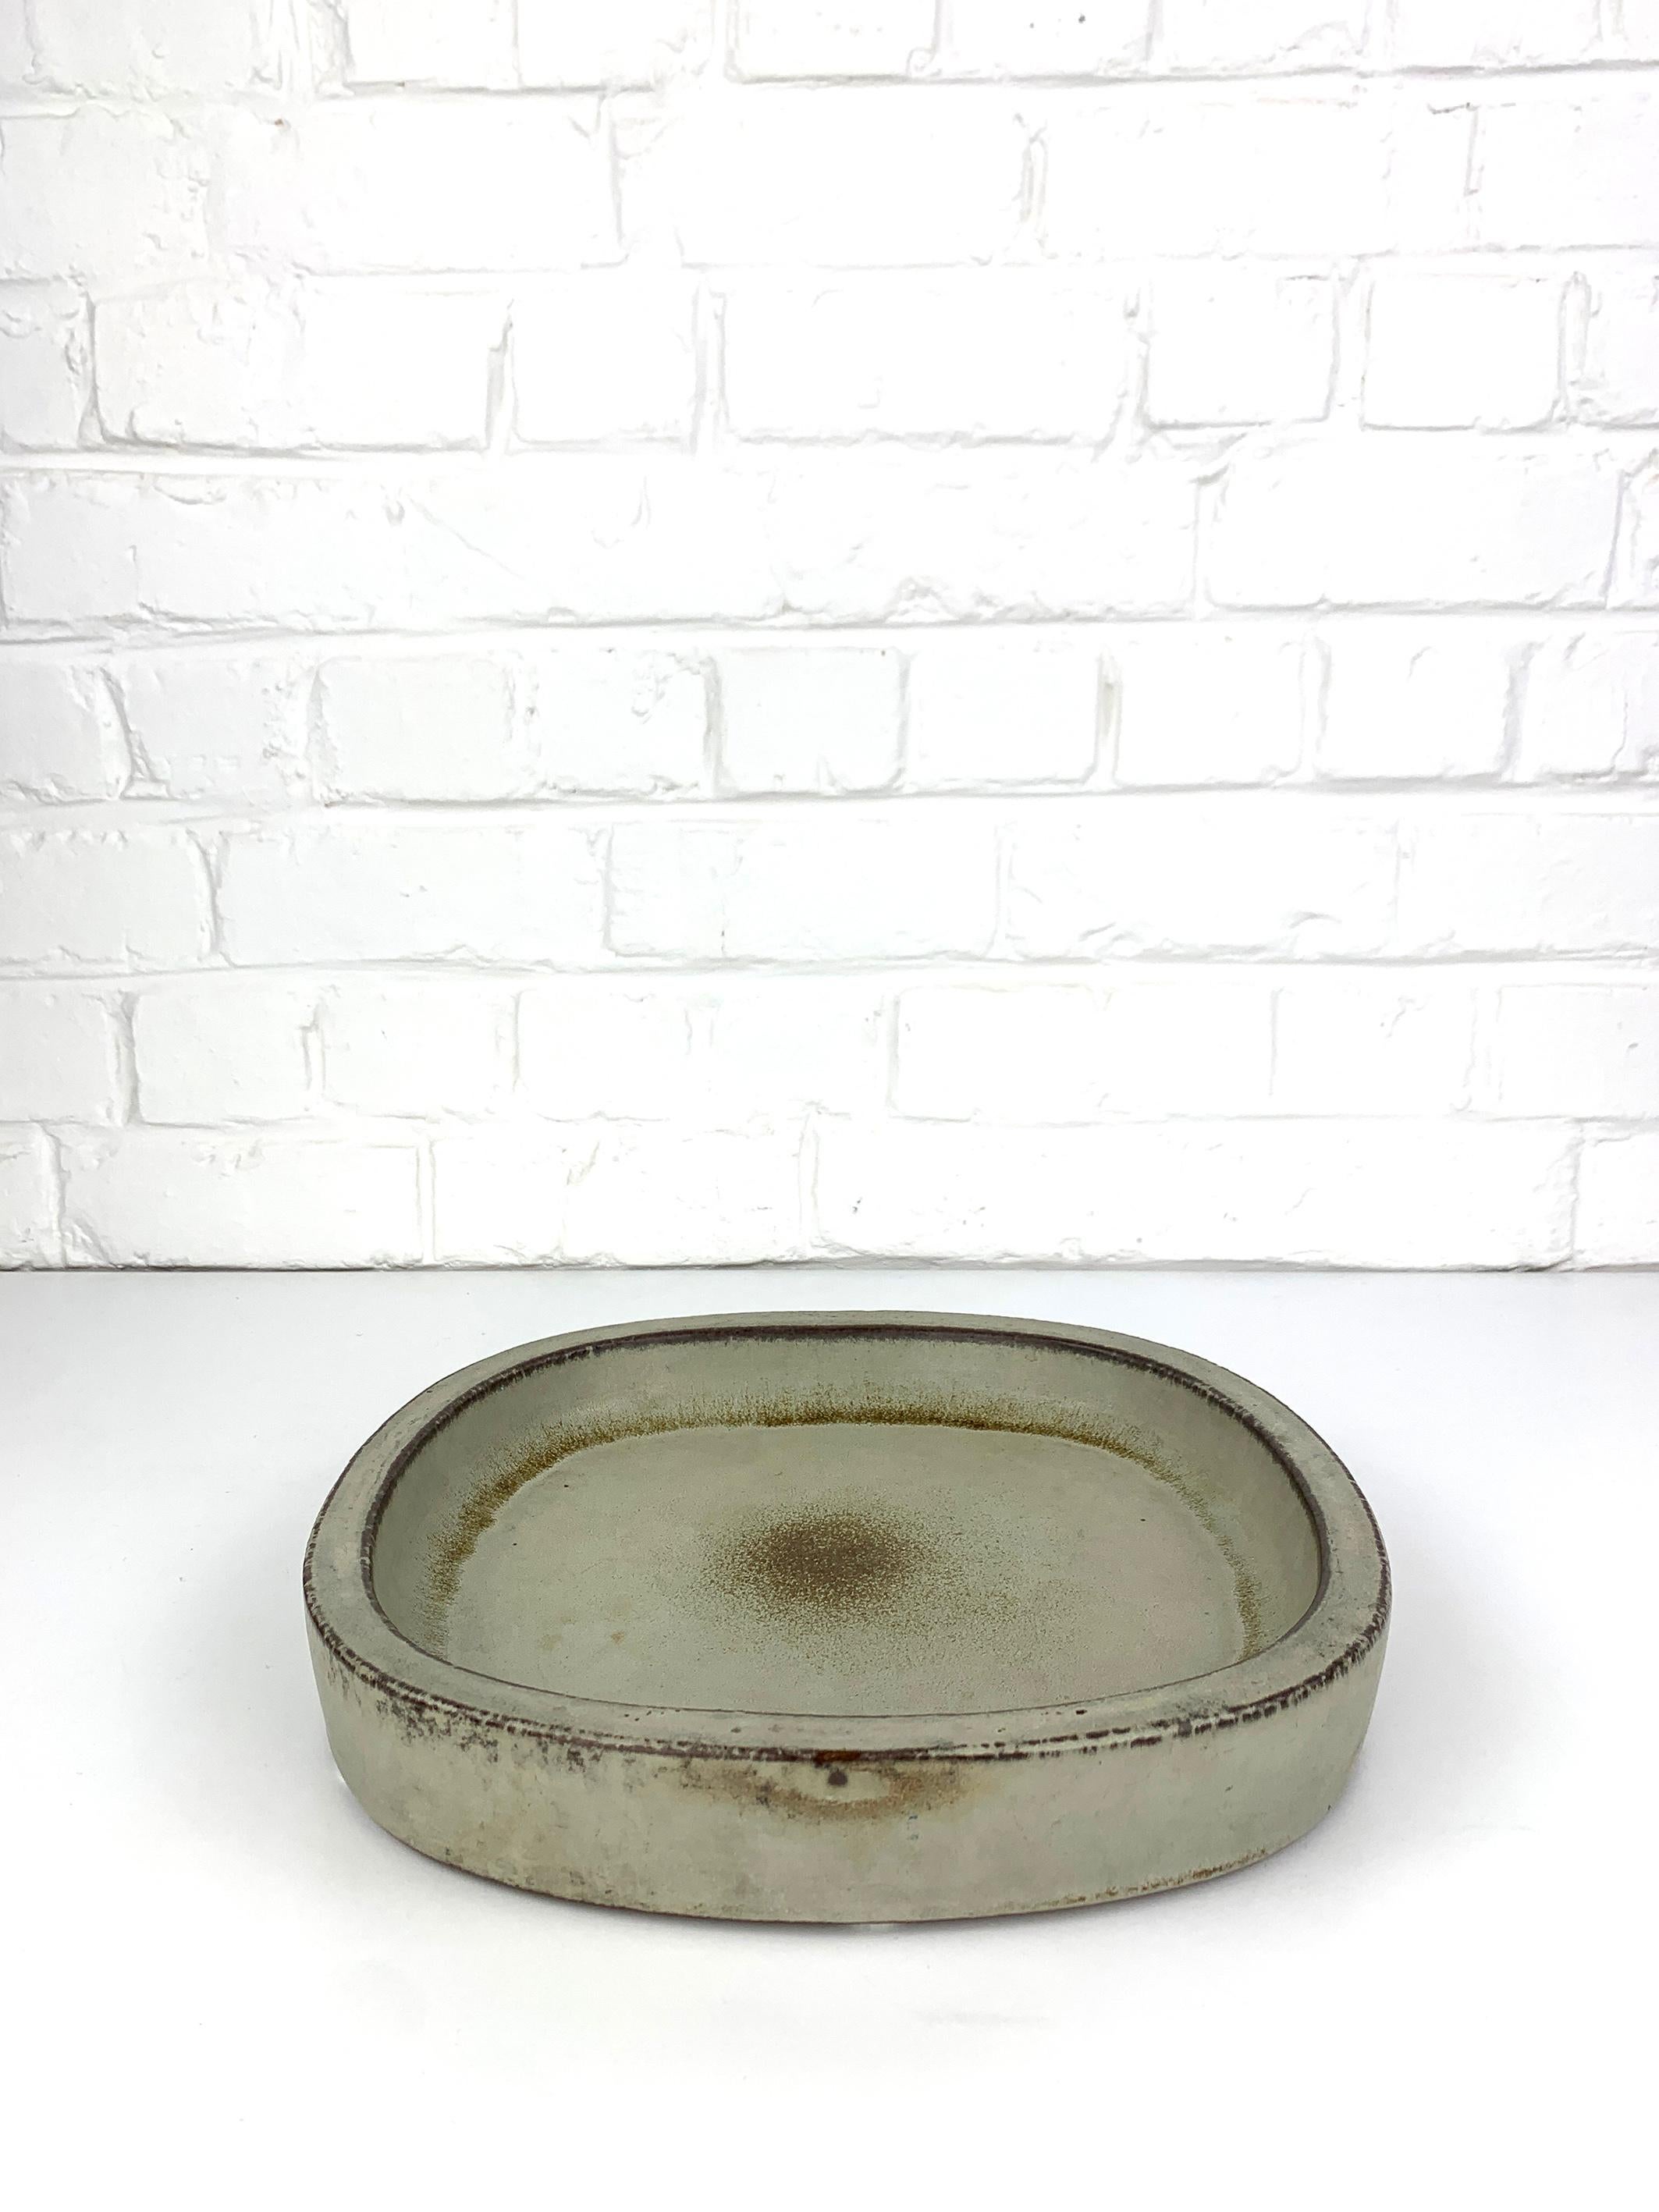 Large ceramic vide-poche or low bowl in earth tones beige-grey brown. Square with rounded edges. 

Scandinavian Mid-Century 1960s, produced by Palshus (Denmark), founded by Per and his wife Annelise Linnemann-Schmidt. 

The couple created and